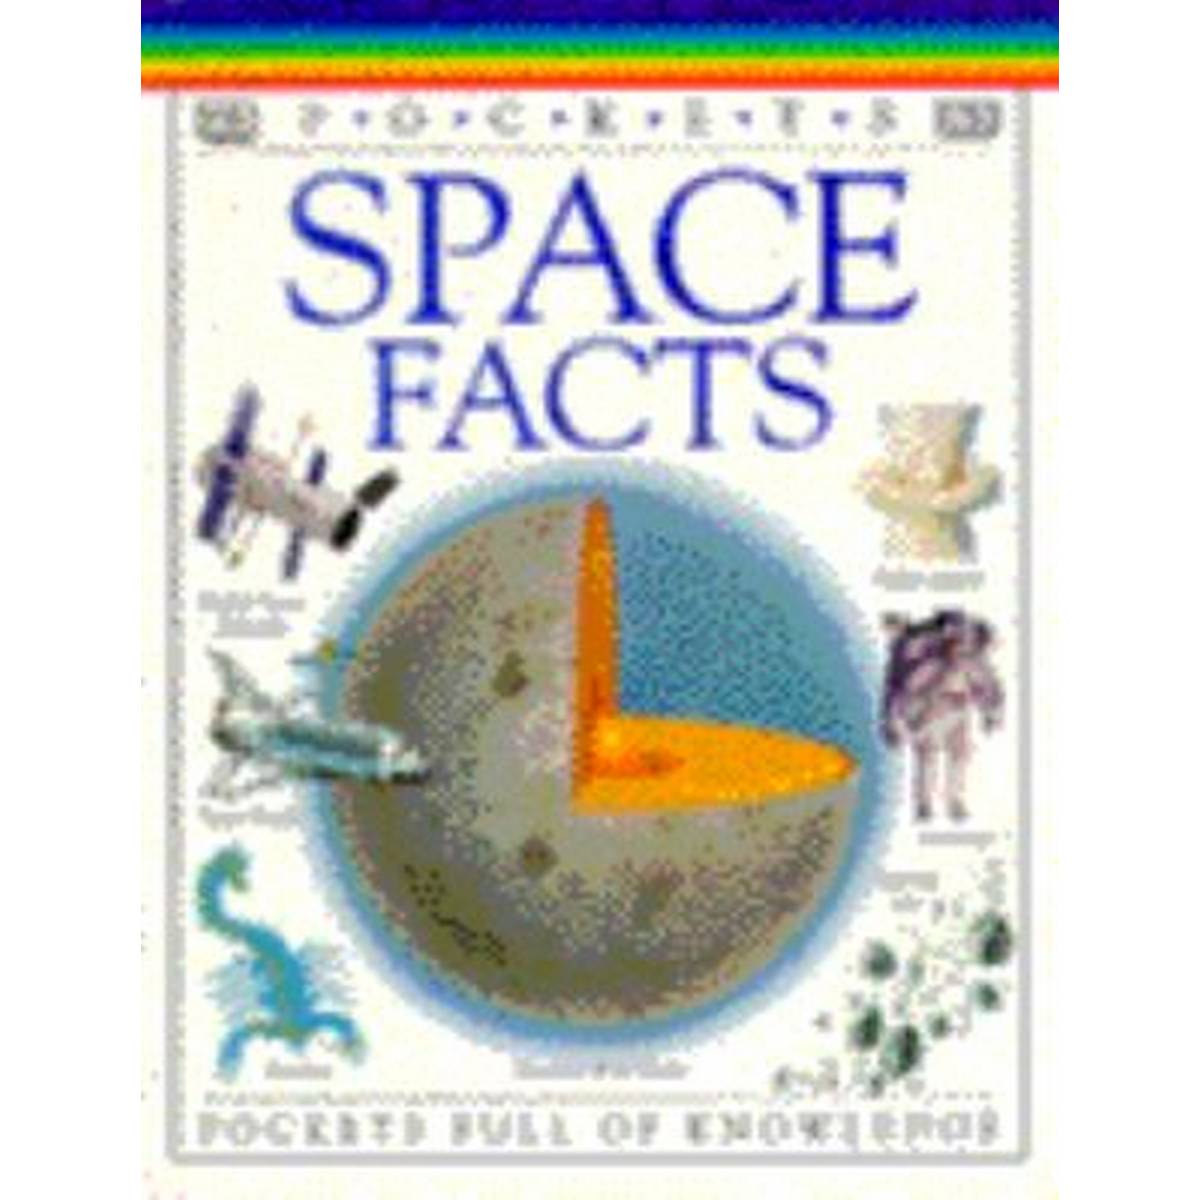 Space Facts (Pockets)